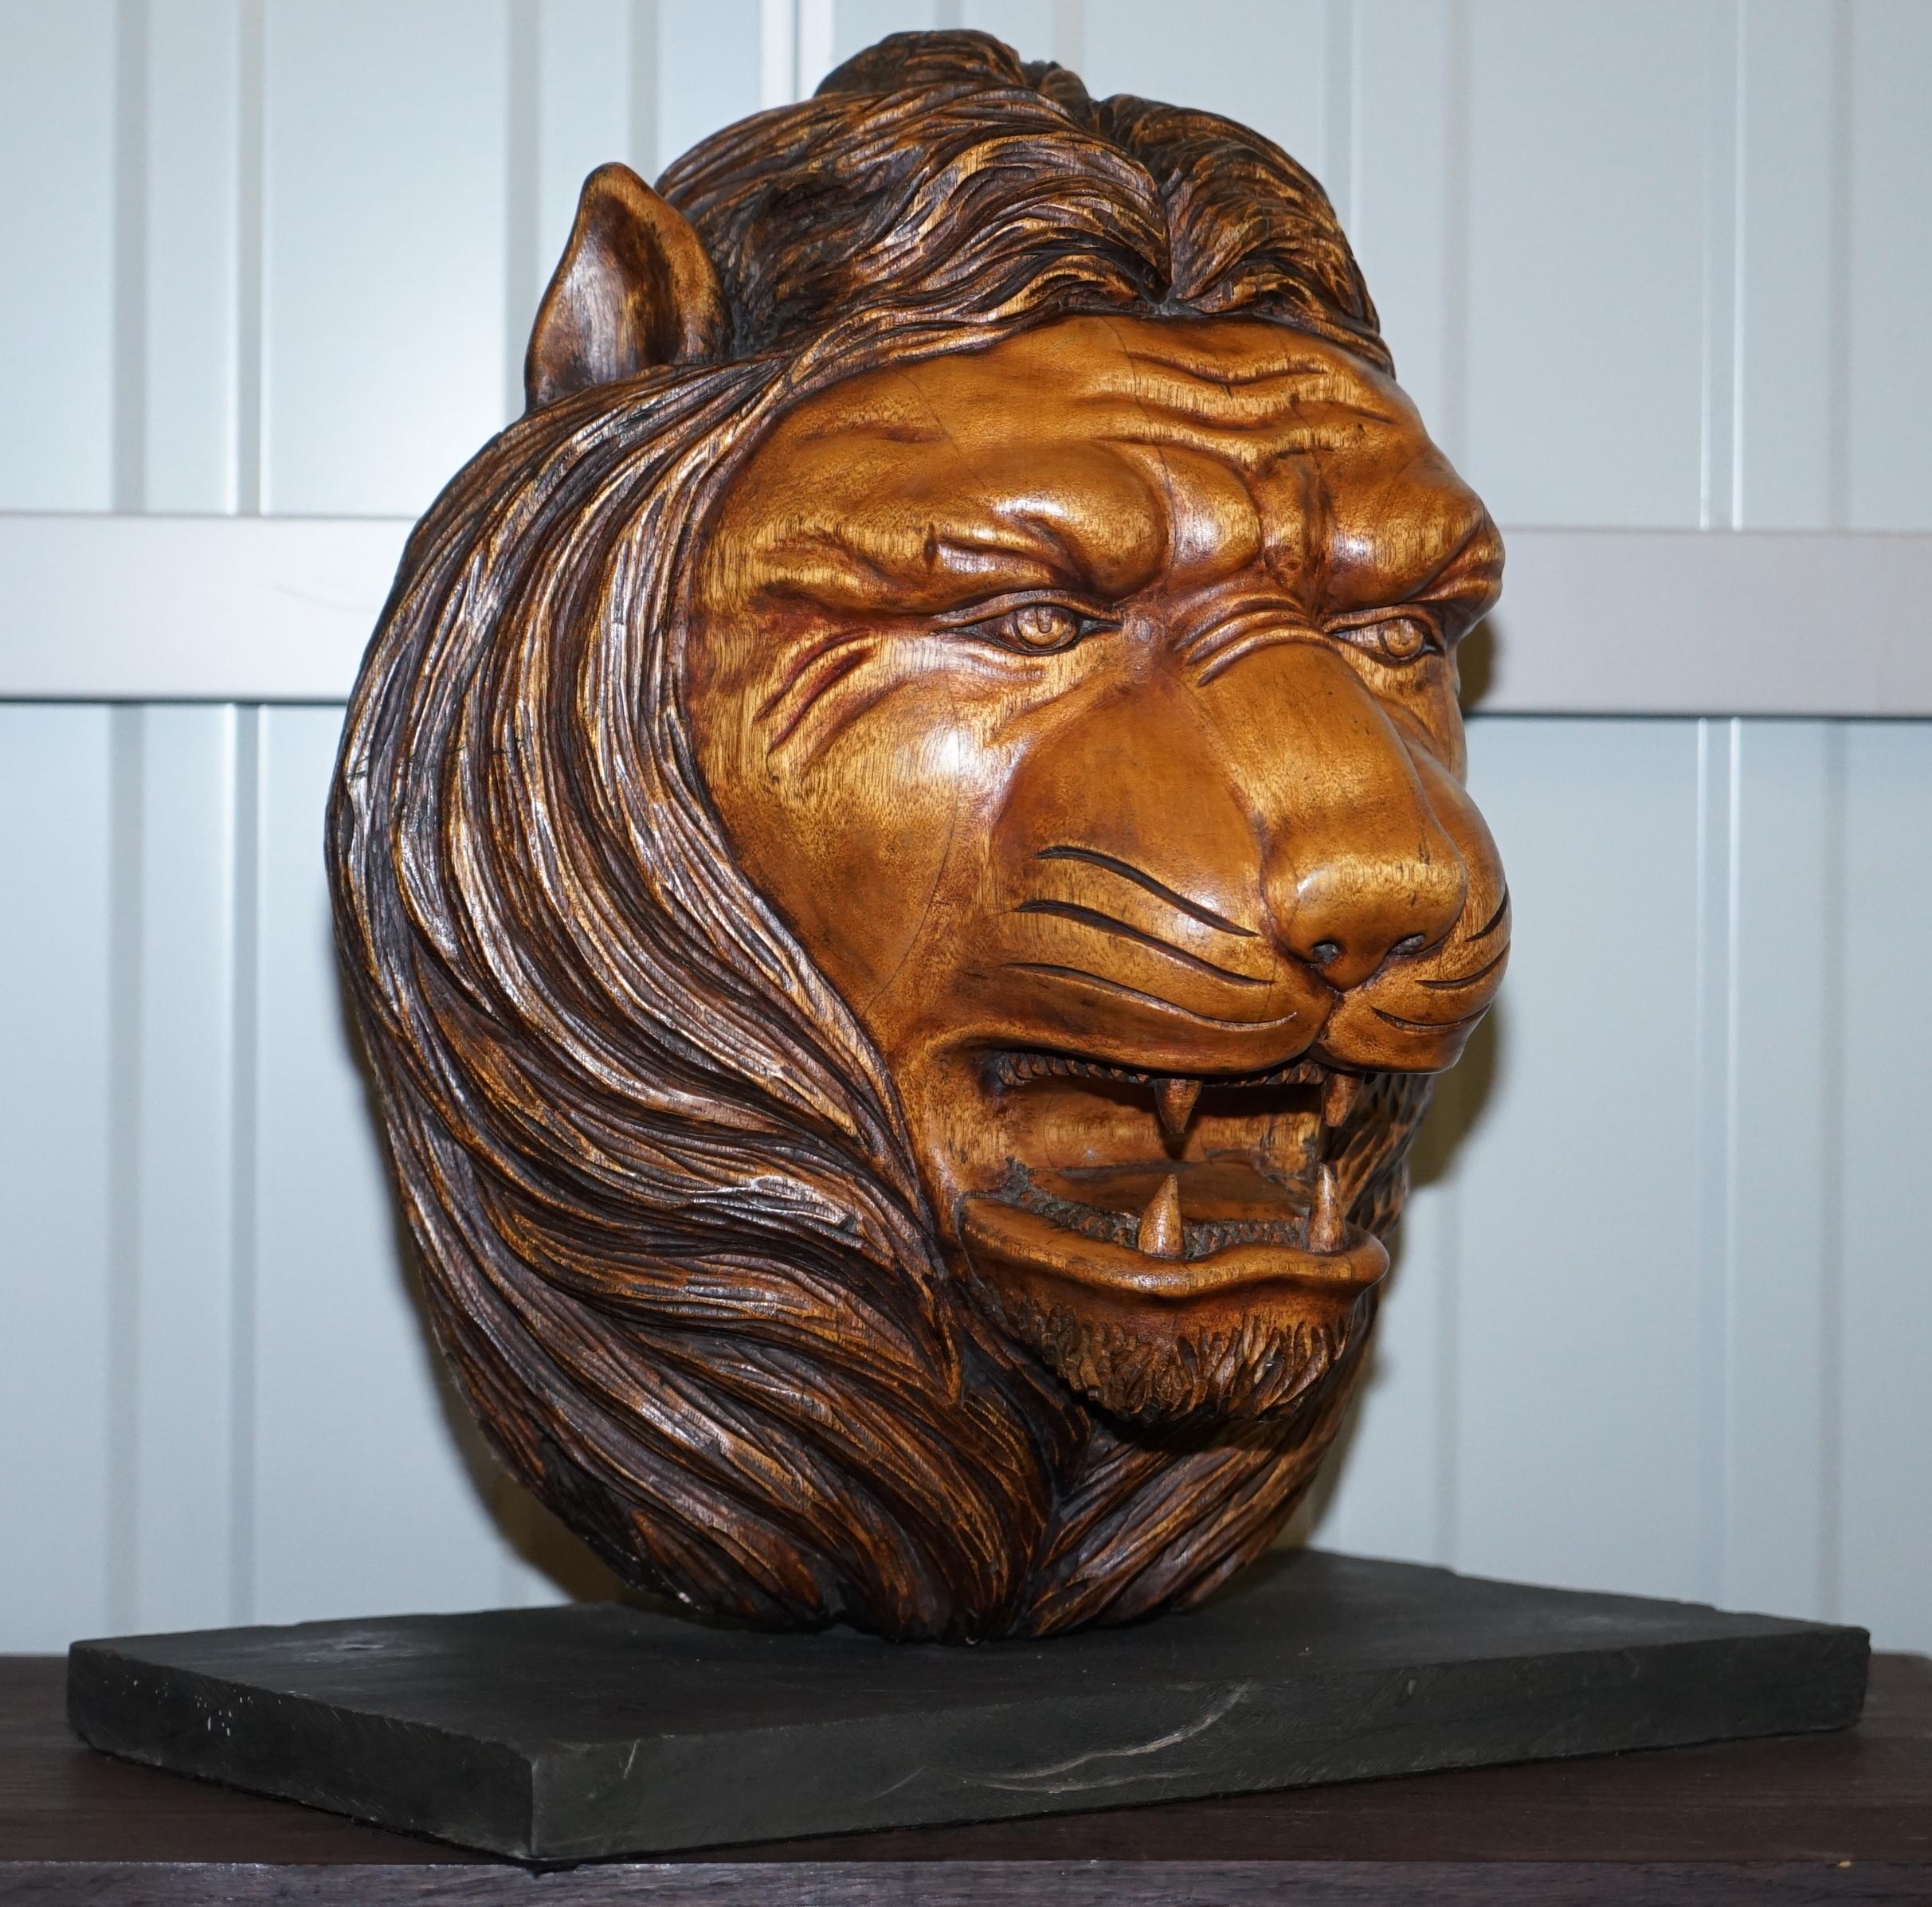 We are delighted to offer for sale this stunning very large and decorative solid wood hand carved Lion's mane mounted to a marble base

A very good looking well made and decorative piece of art. The lions head is carved in a few sections of solid